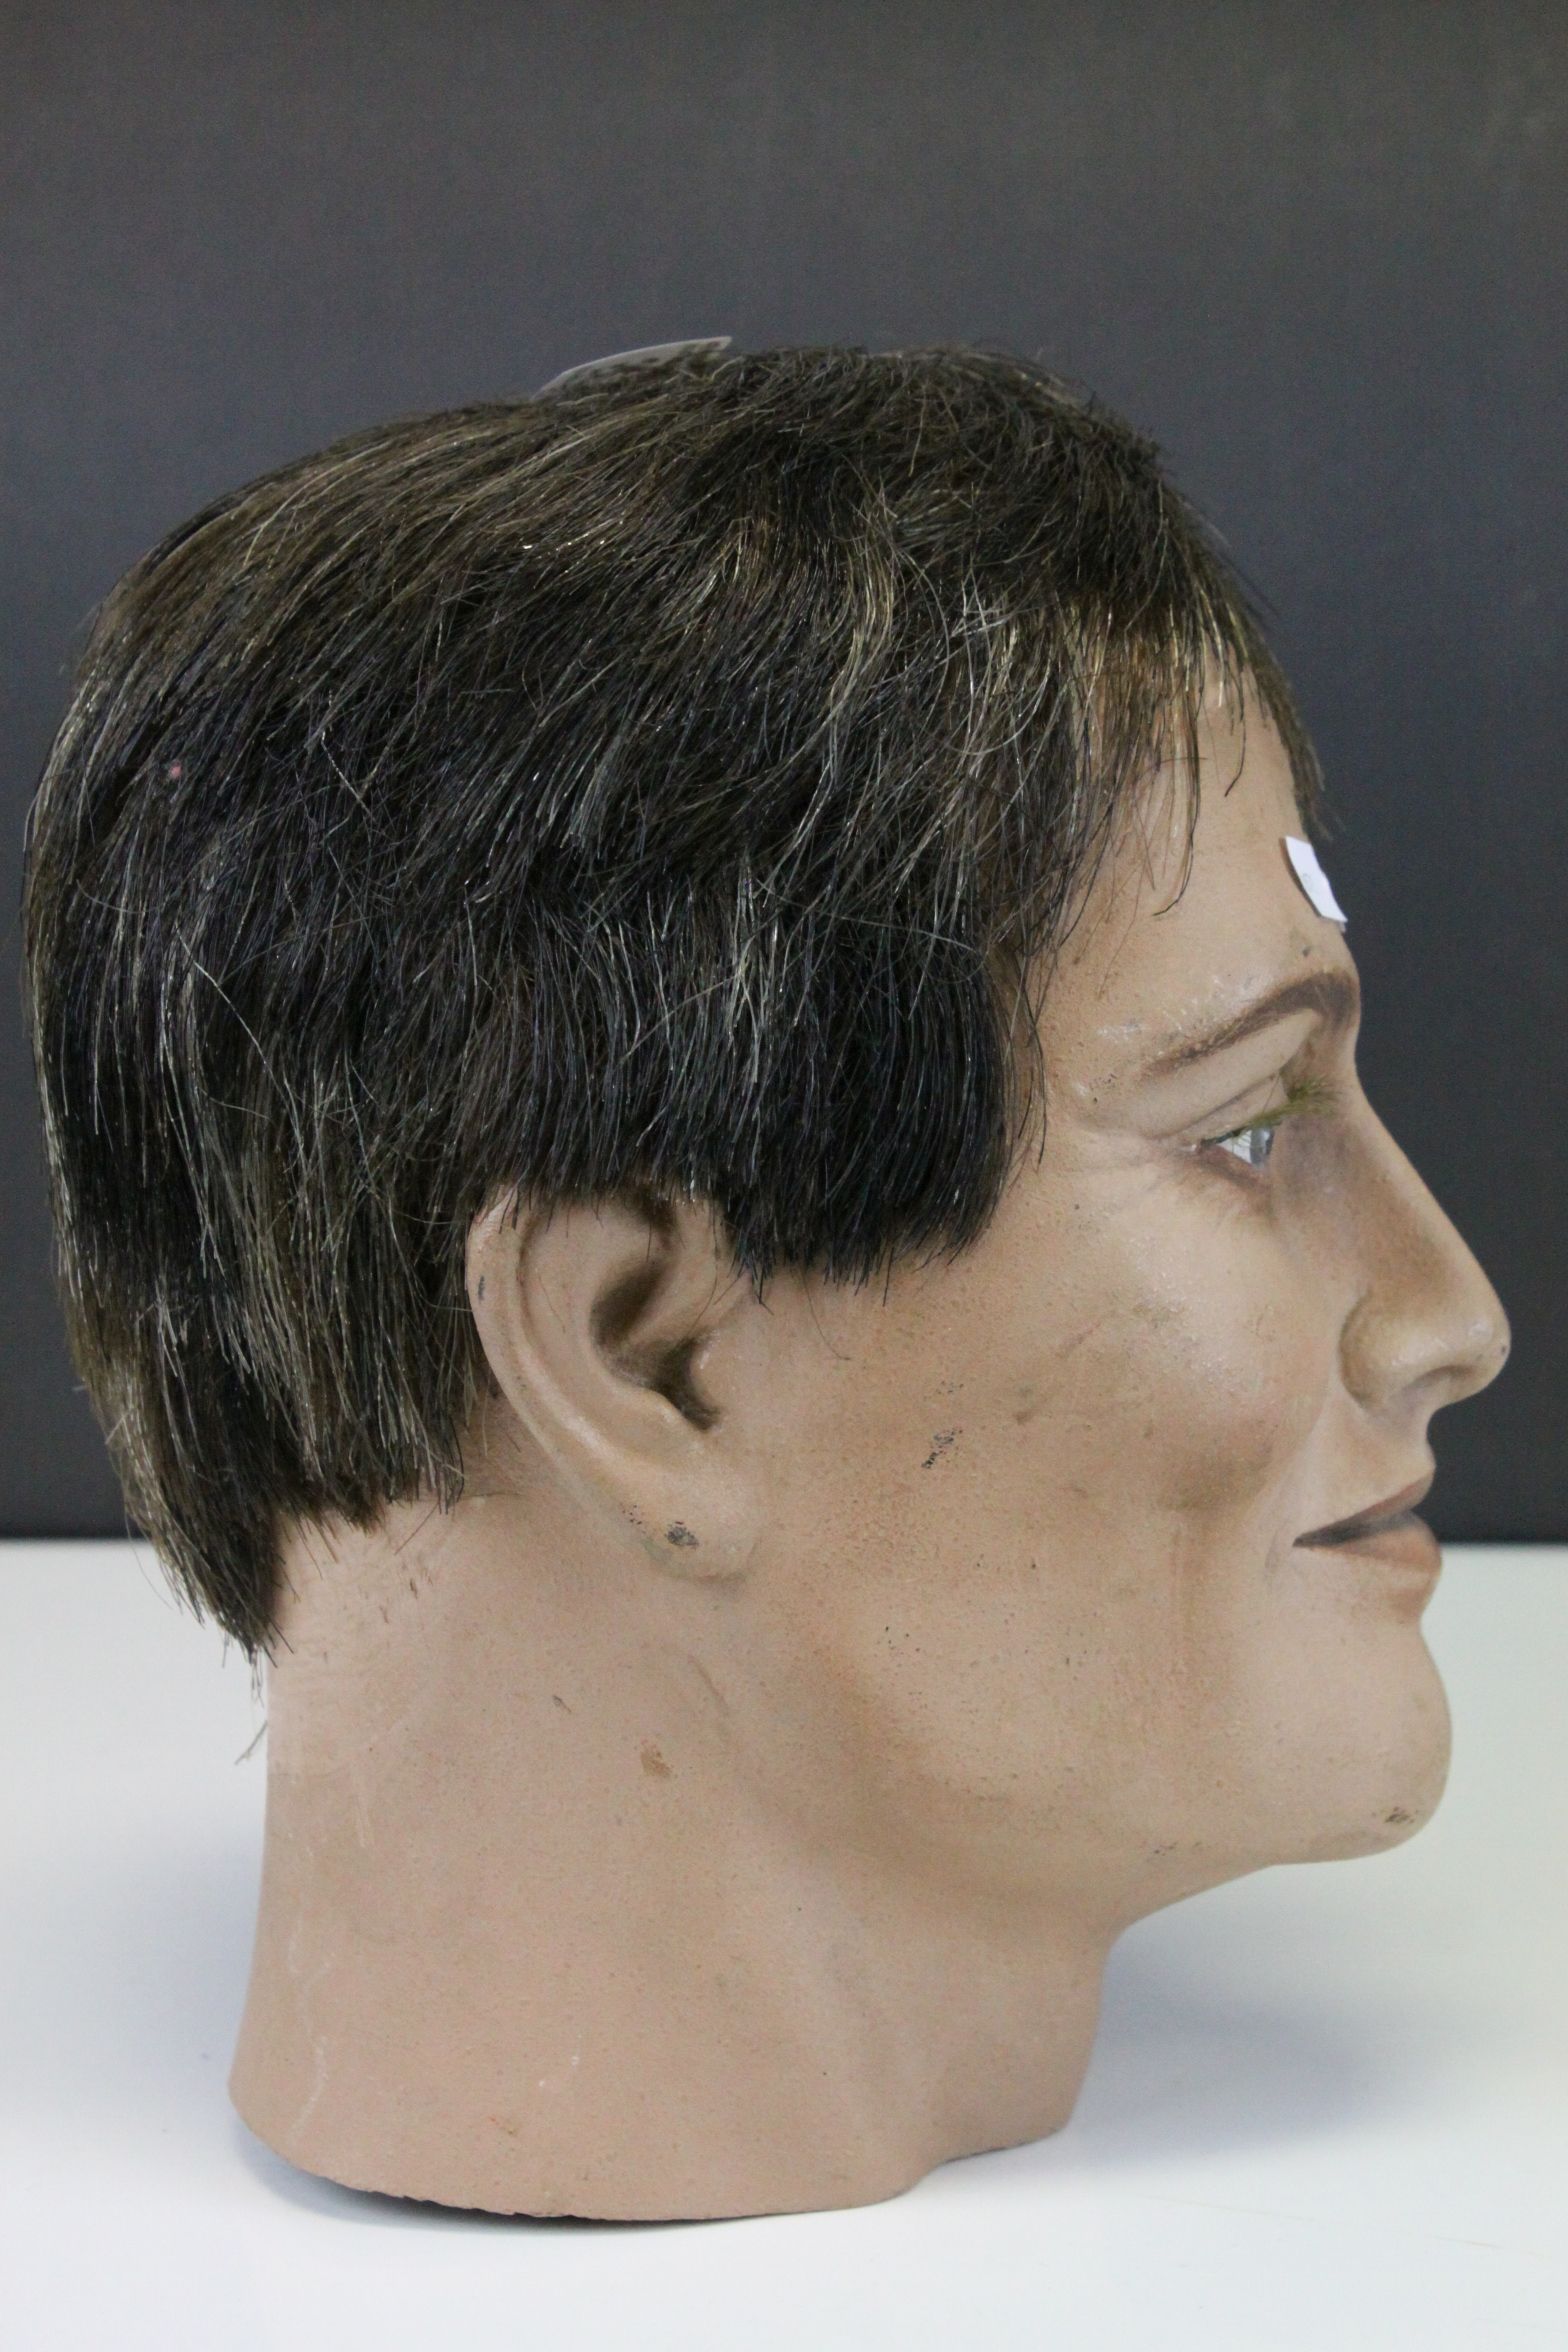 Male Mannequin Head, possibly as a shop display for Hats, 26cms high - Image 3 of 3